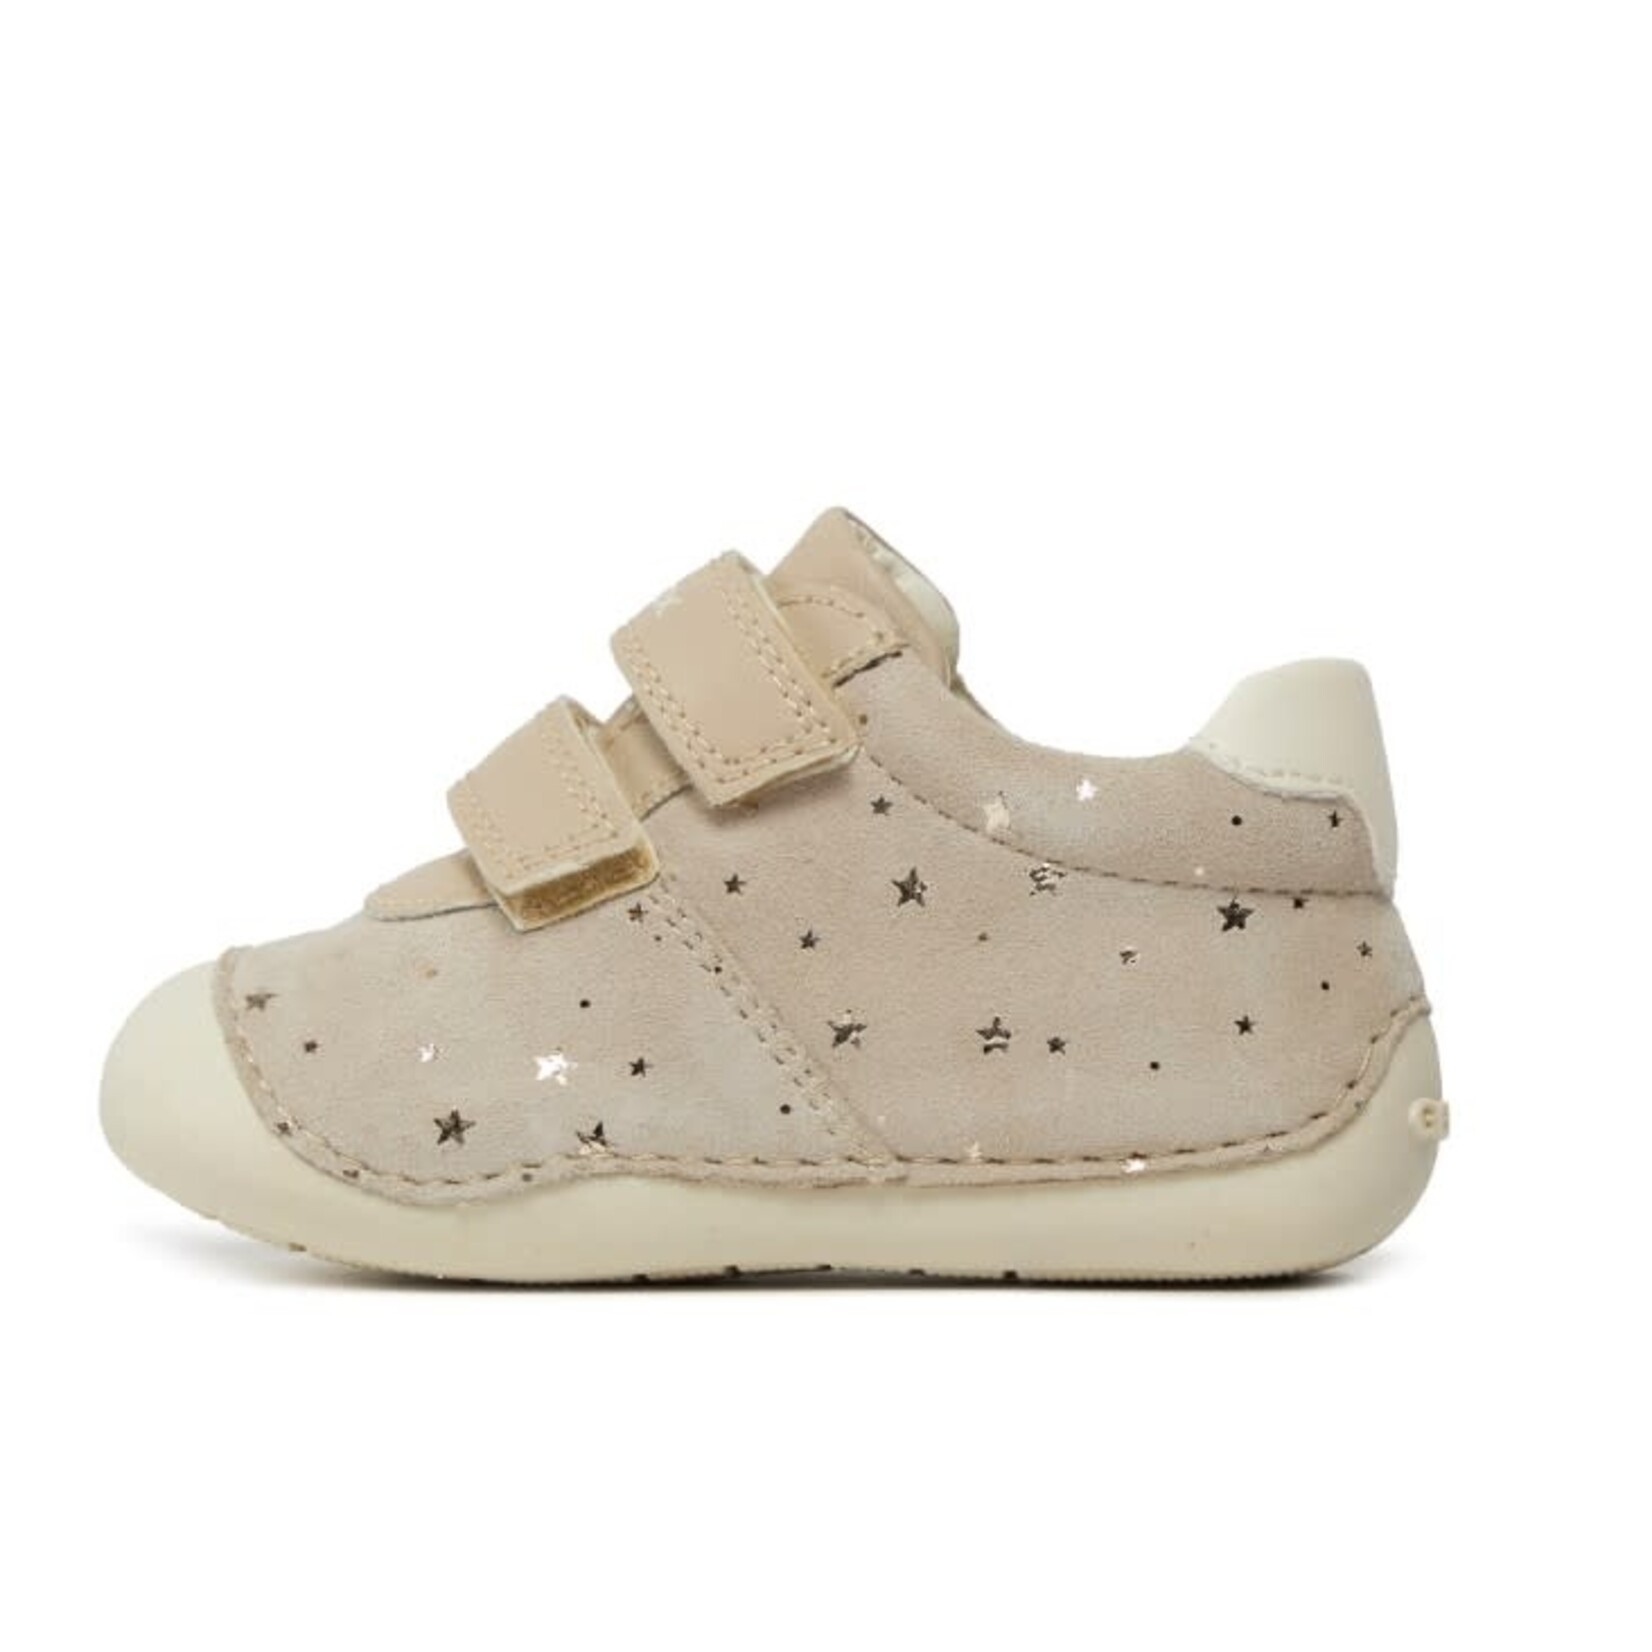 Geox GEOX - First steps soft soled leather shoes 'Tutim - Beige/Platinum'